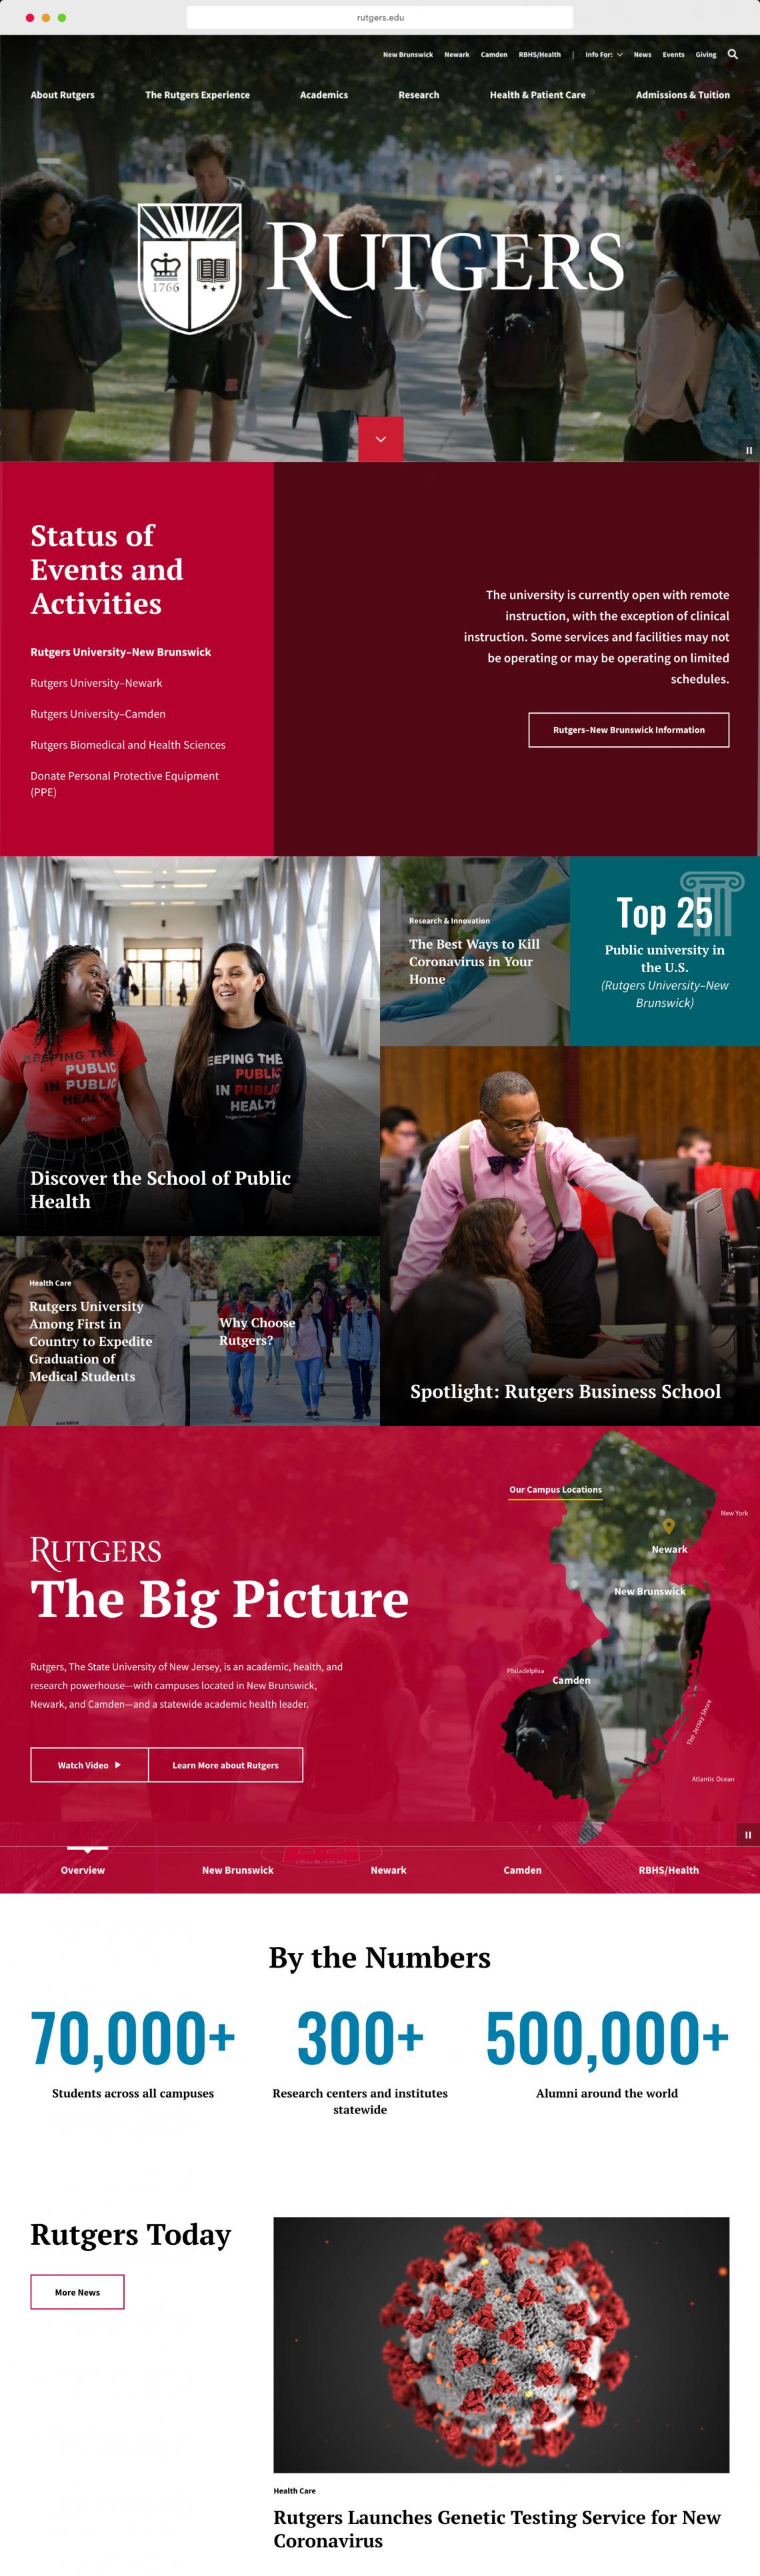 rutgers home page design